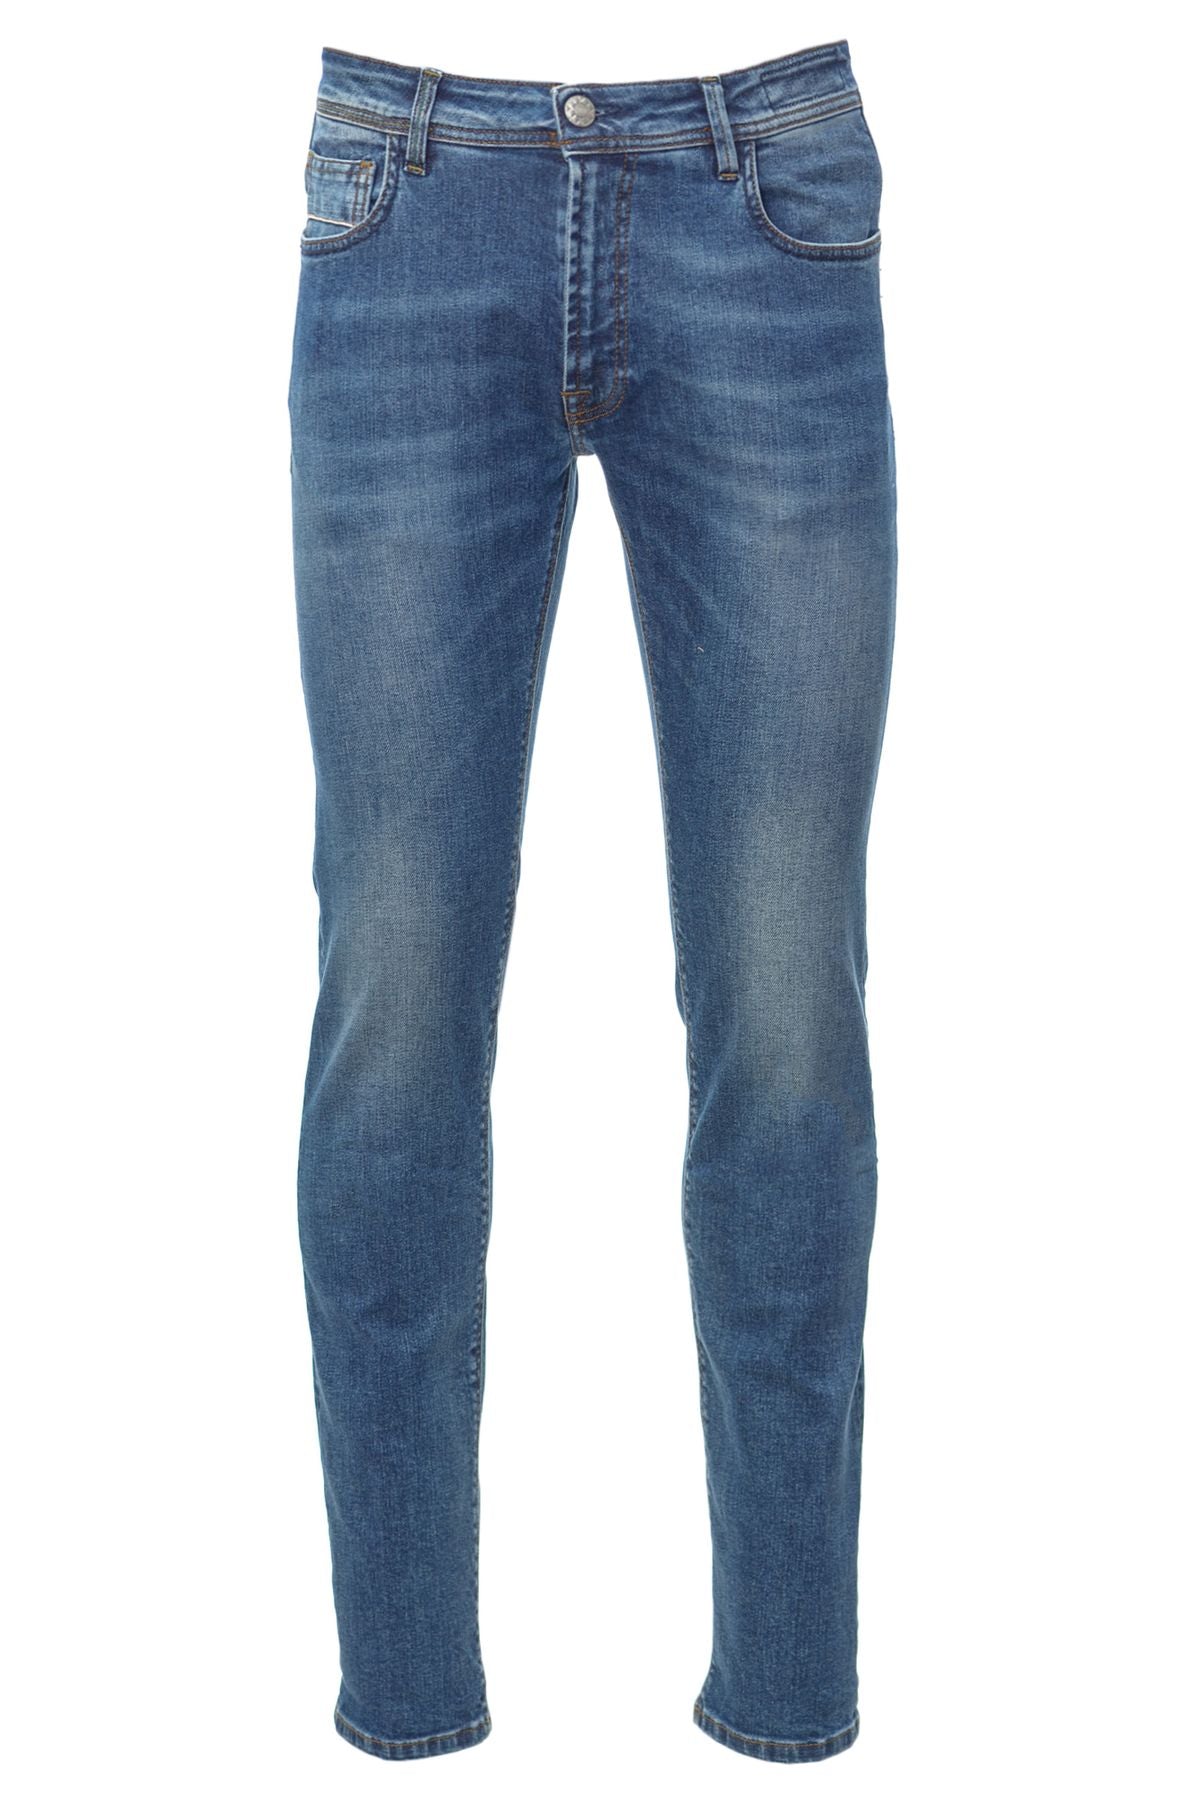 Re-HasH Jeans Spring/Summer Cotton